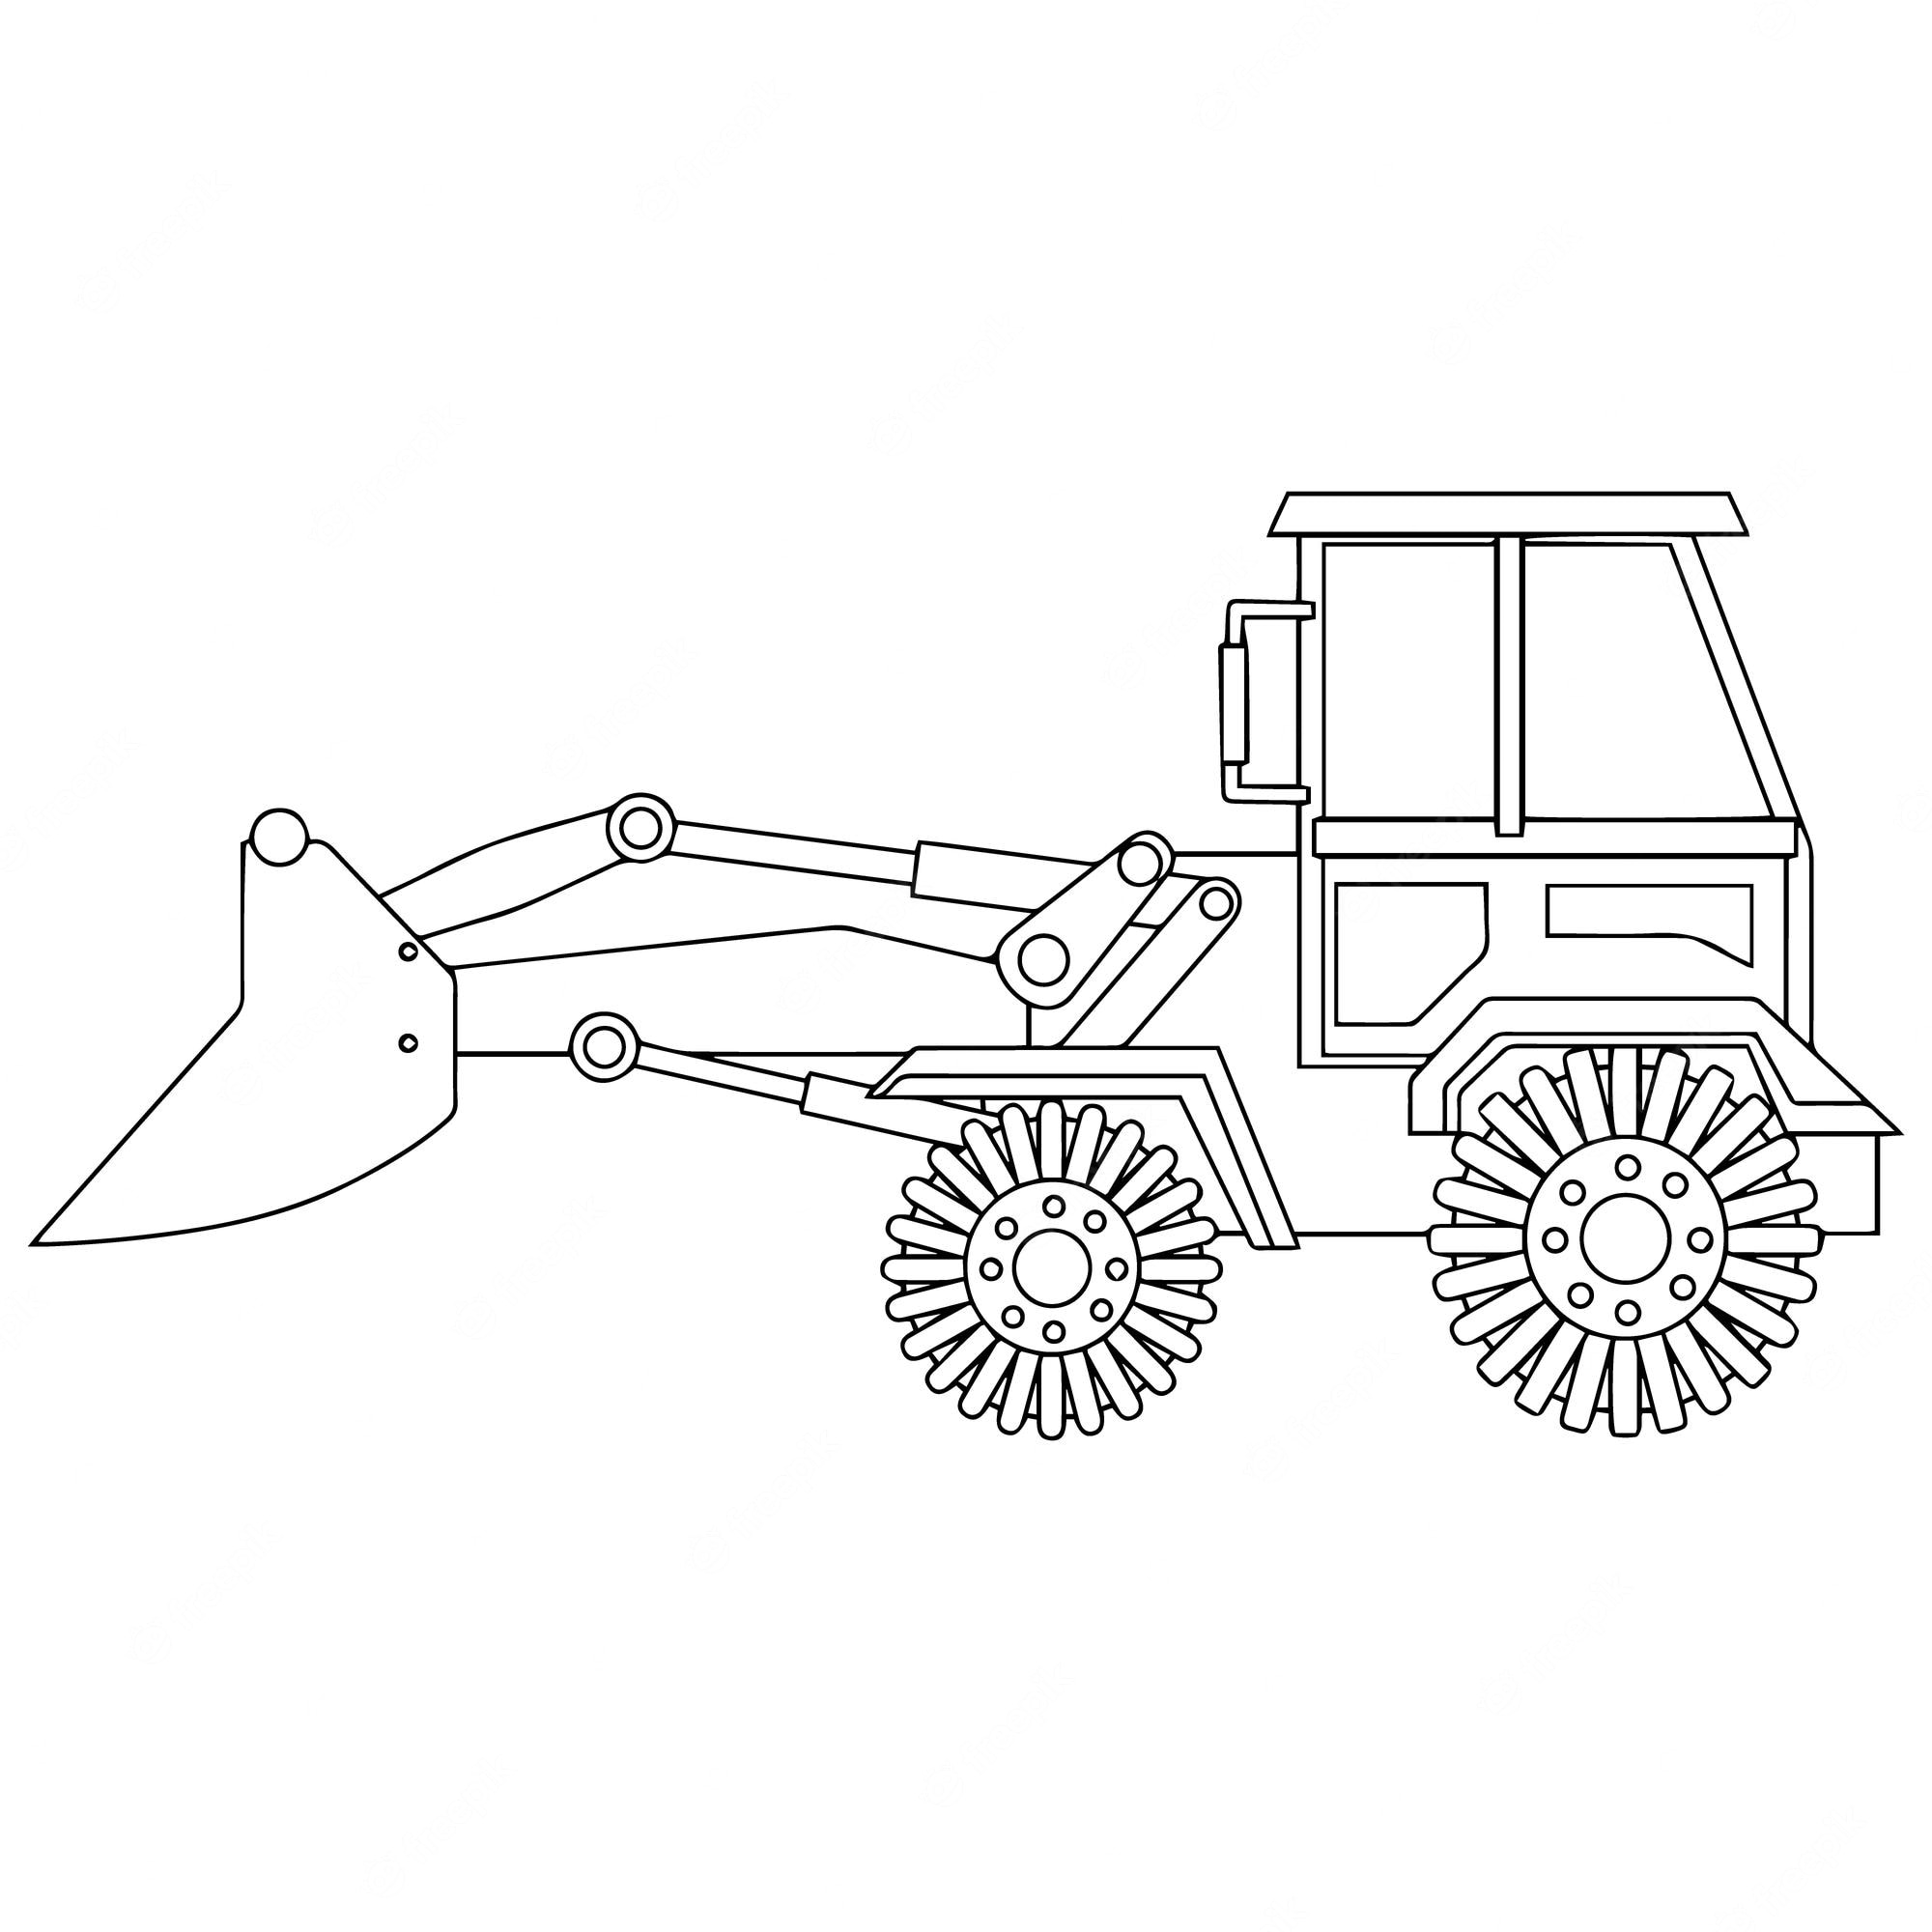 Truck Coloring Images | Free Vectors, Stock Photos & PSD